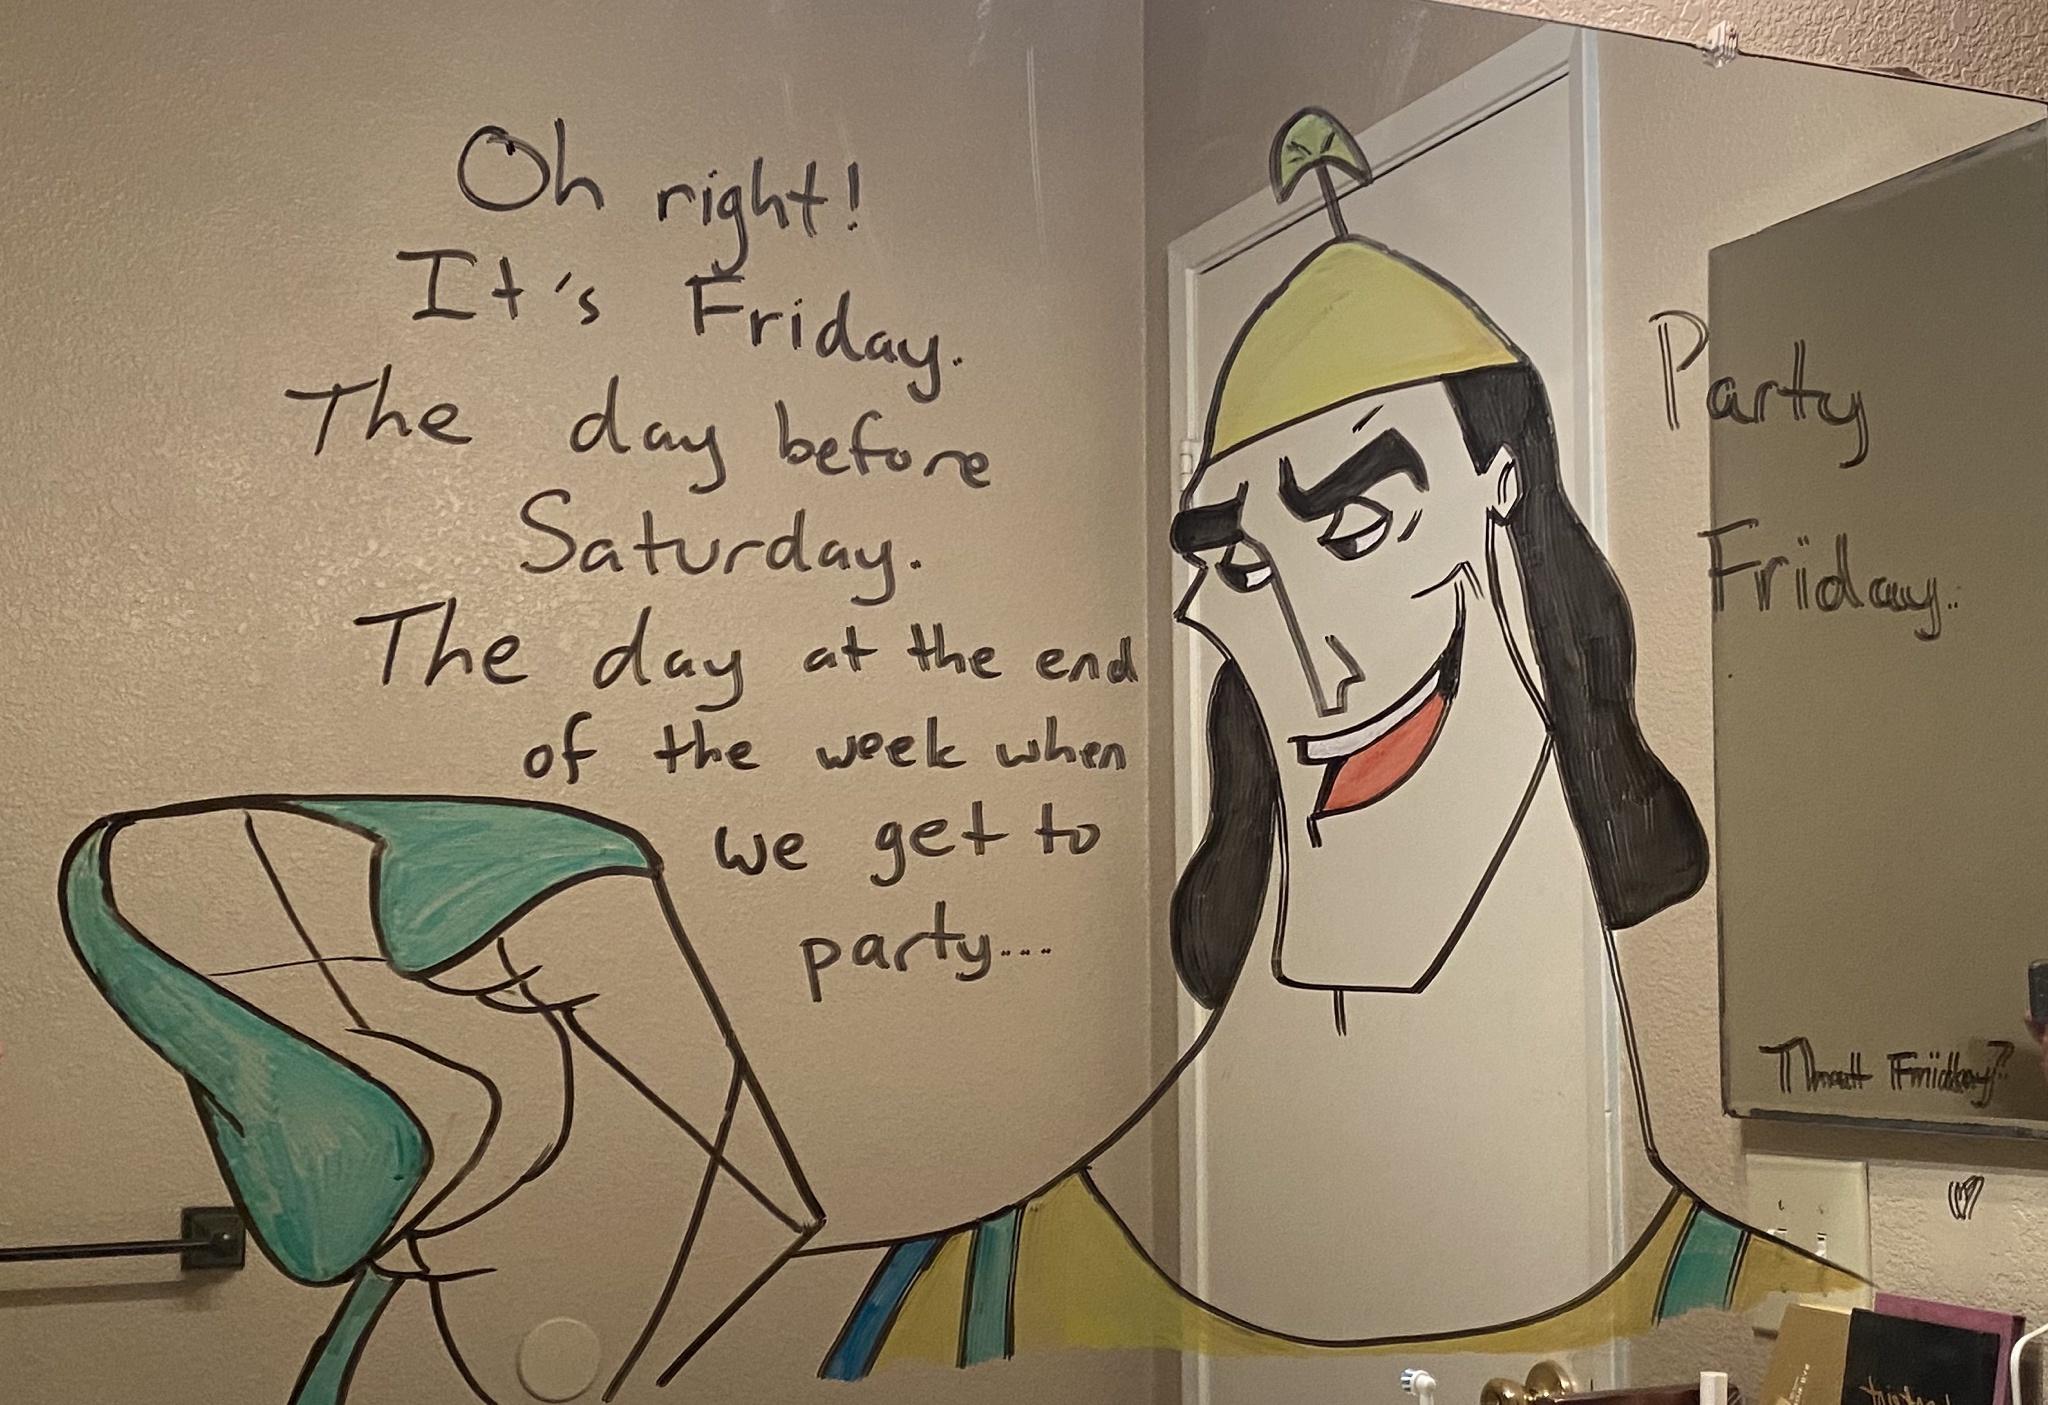 cartoon - Oh right! It's Friday. The day before Saturday. The day at the end of the week when Party Friday. we get to party... Thaelt Fmichany